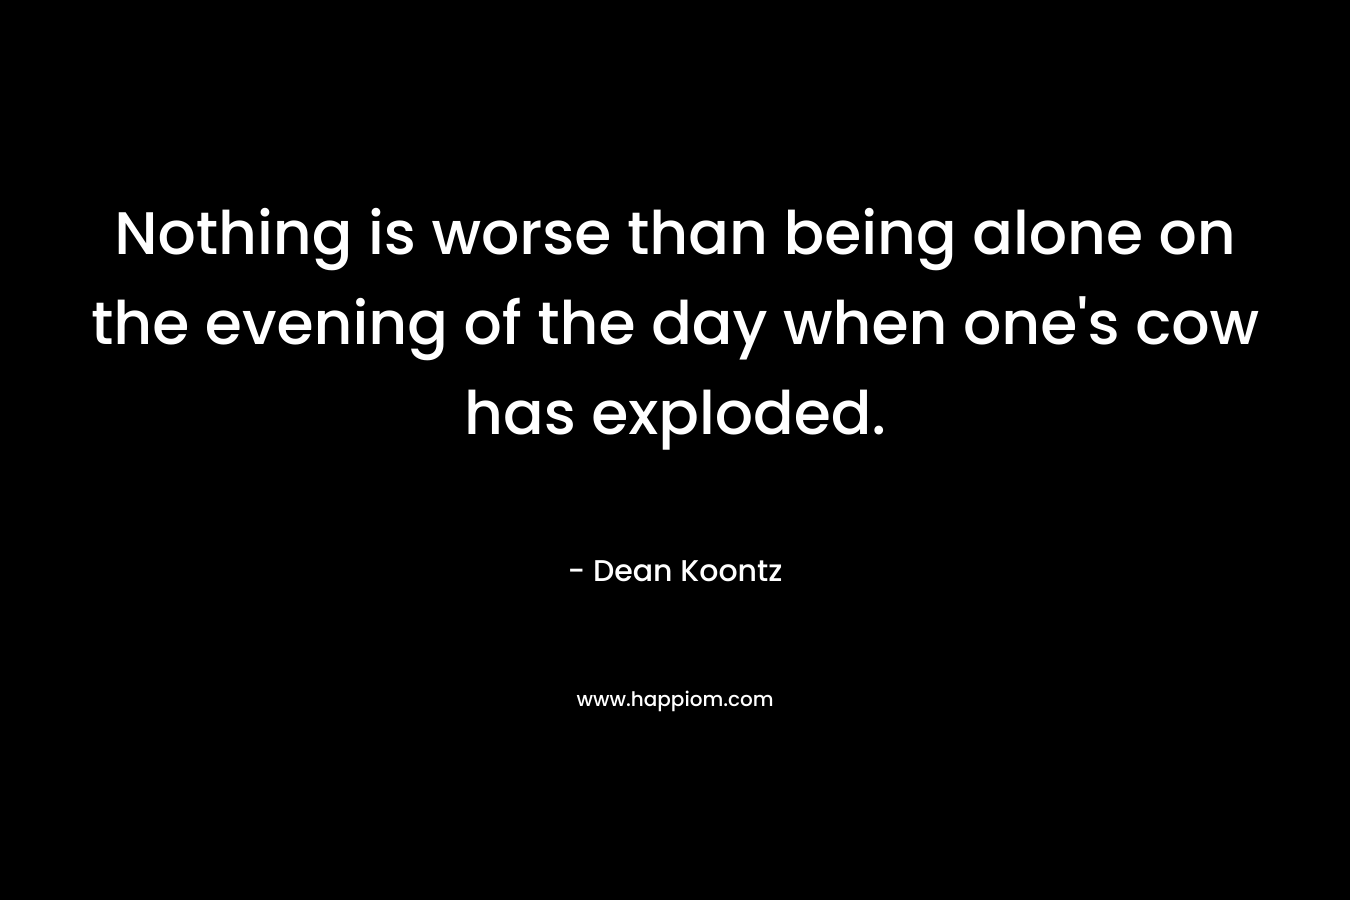 Nothing is worse than being alone on the evening of the day when one’s cow has exploded. – Dean Koontz